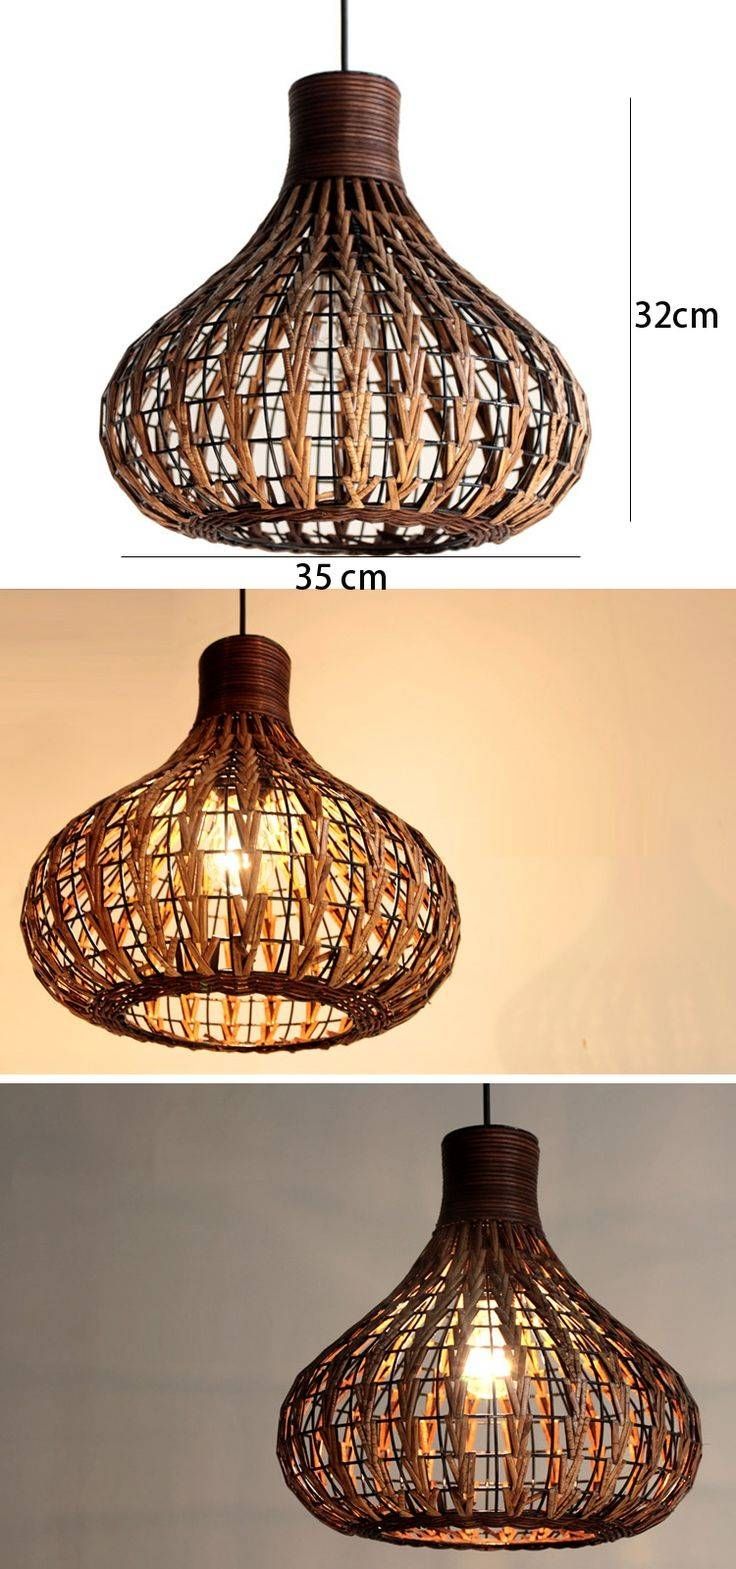 26 Best Lighting Images On Pinterest | Pendant Lights, Home And Rattan With Rattan Pendant Lighting (View 2 of 15)